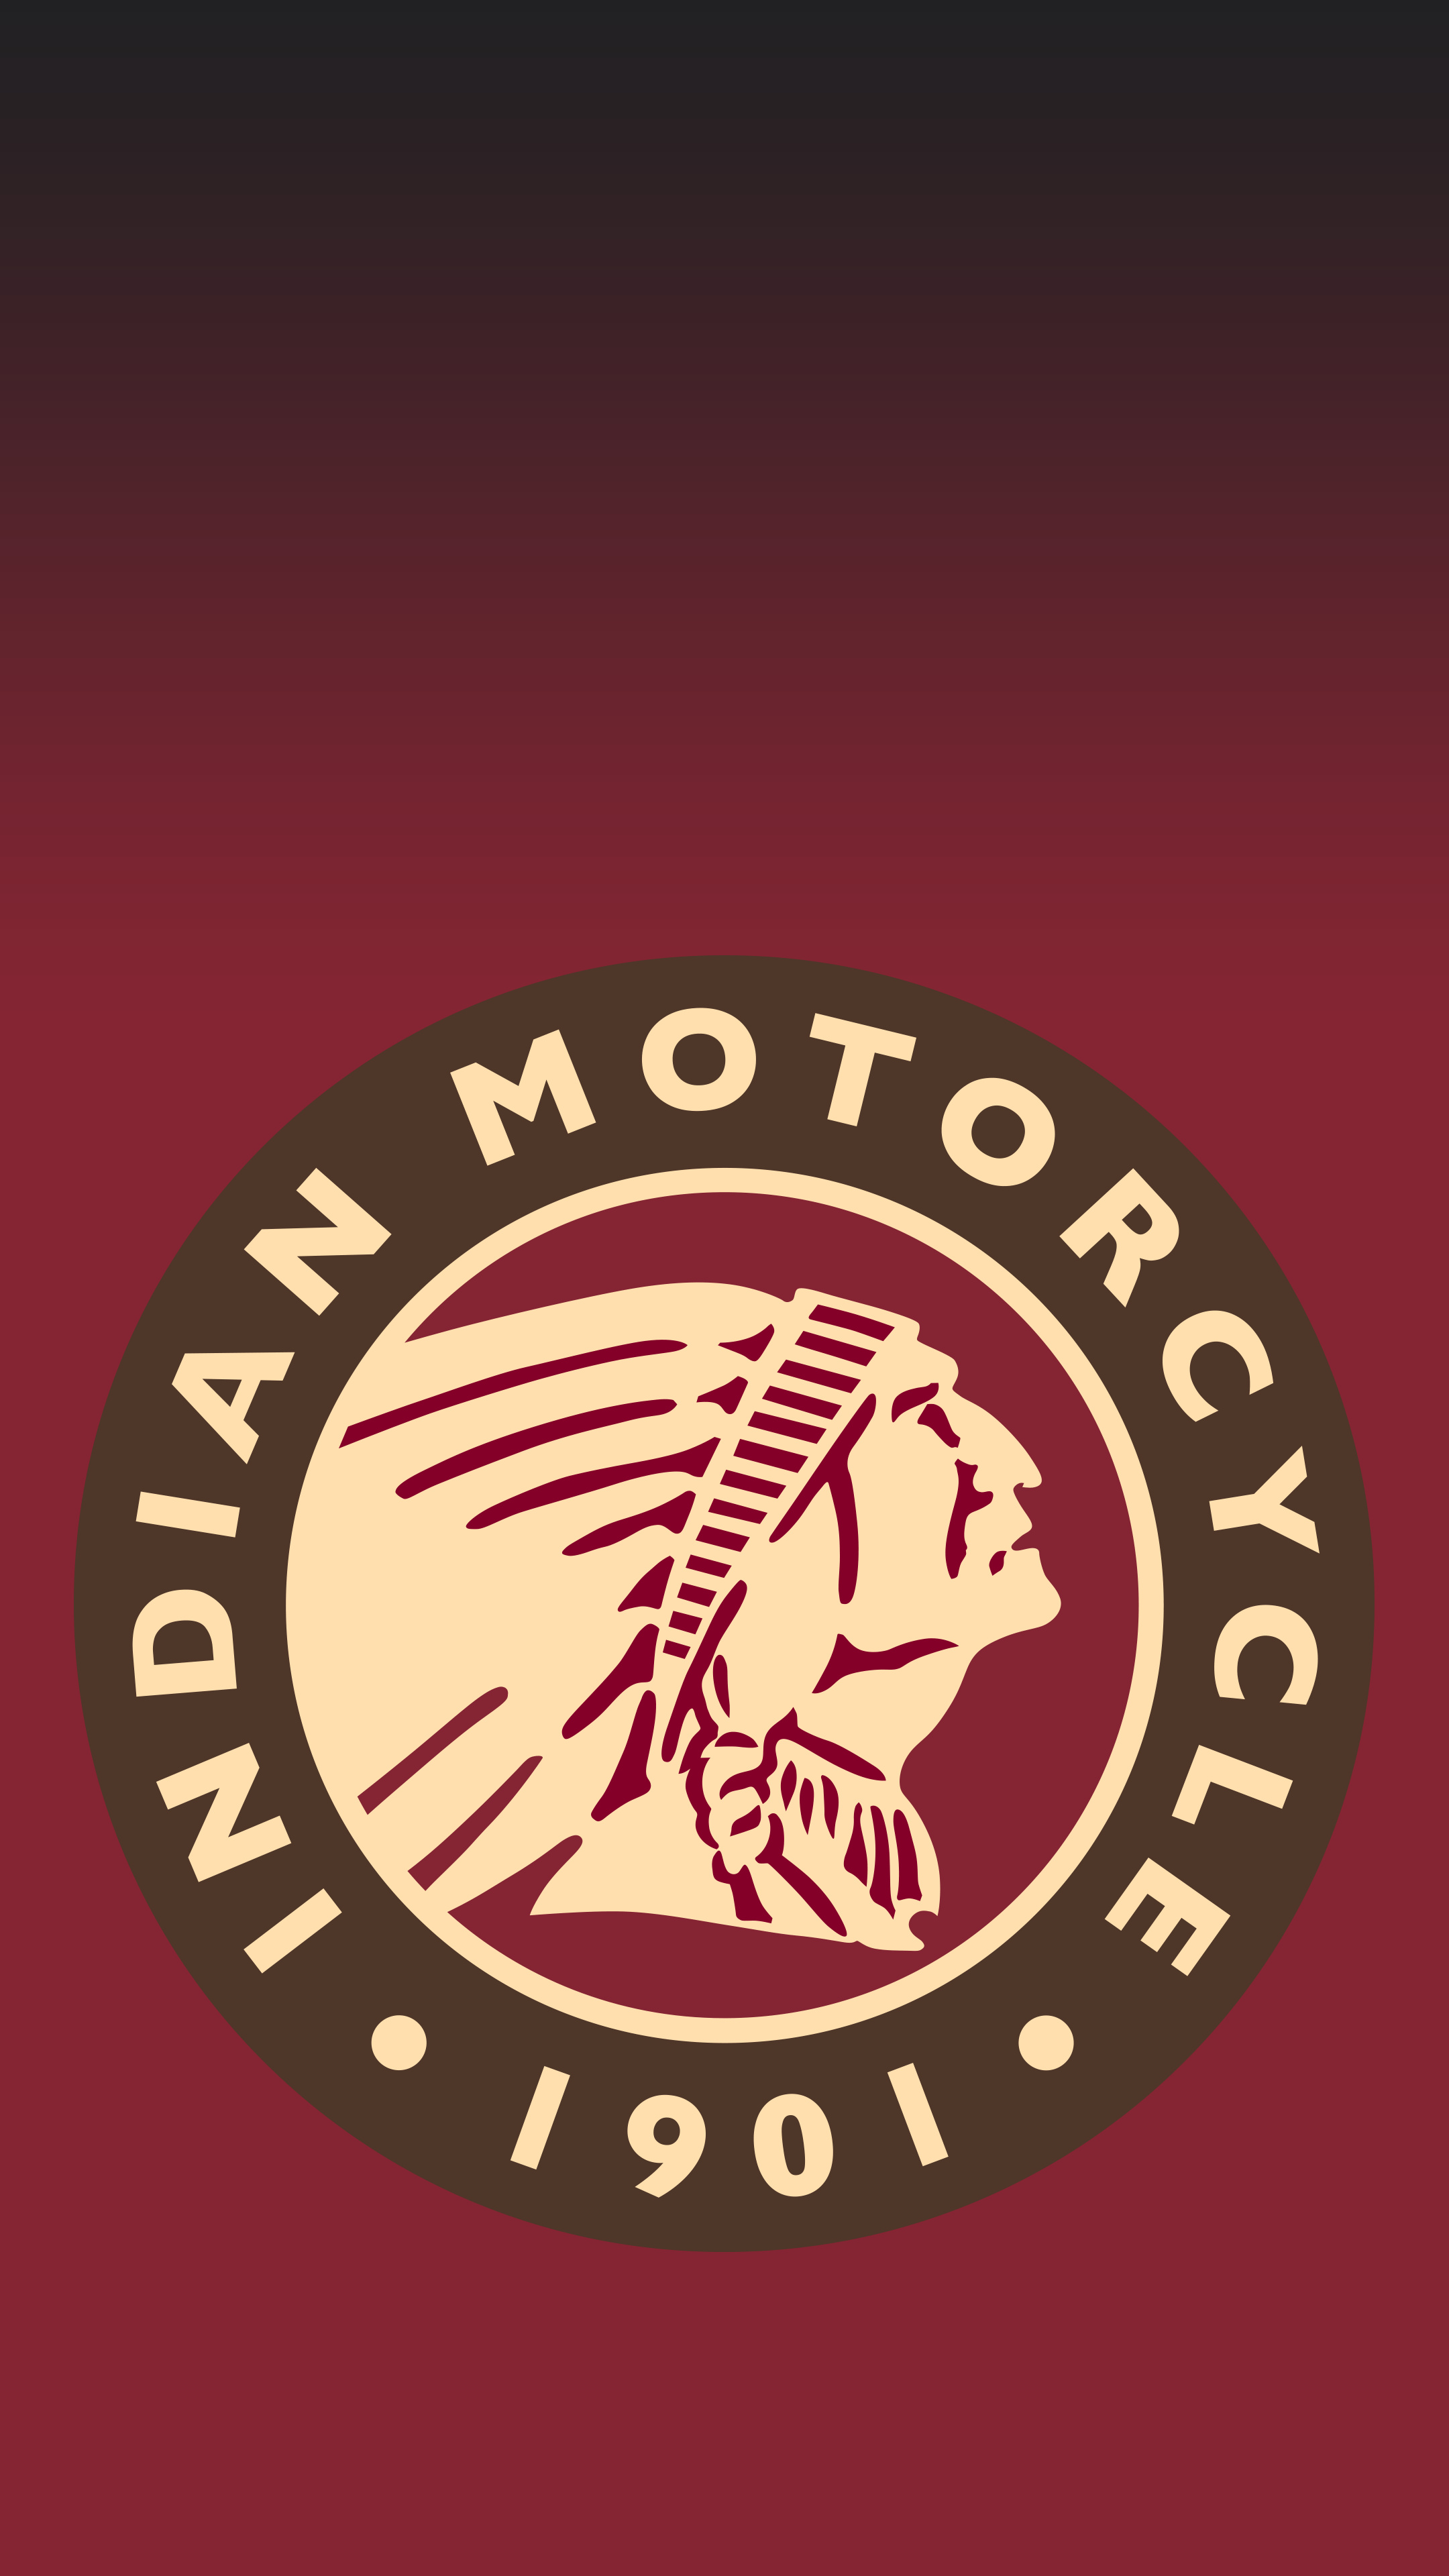 Indian Motorcycle, Logo wallpapers, Classic Indian imagery, Motorcycle brand identity, 2160x3840 4K Phone